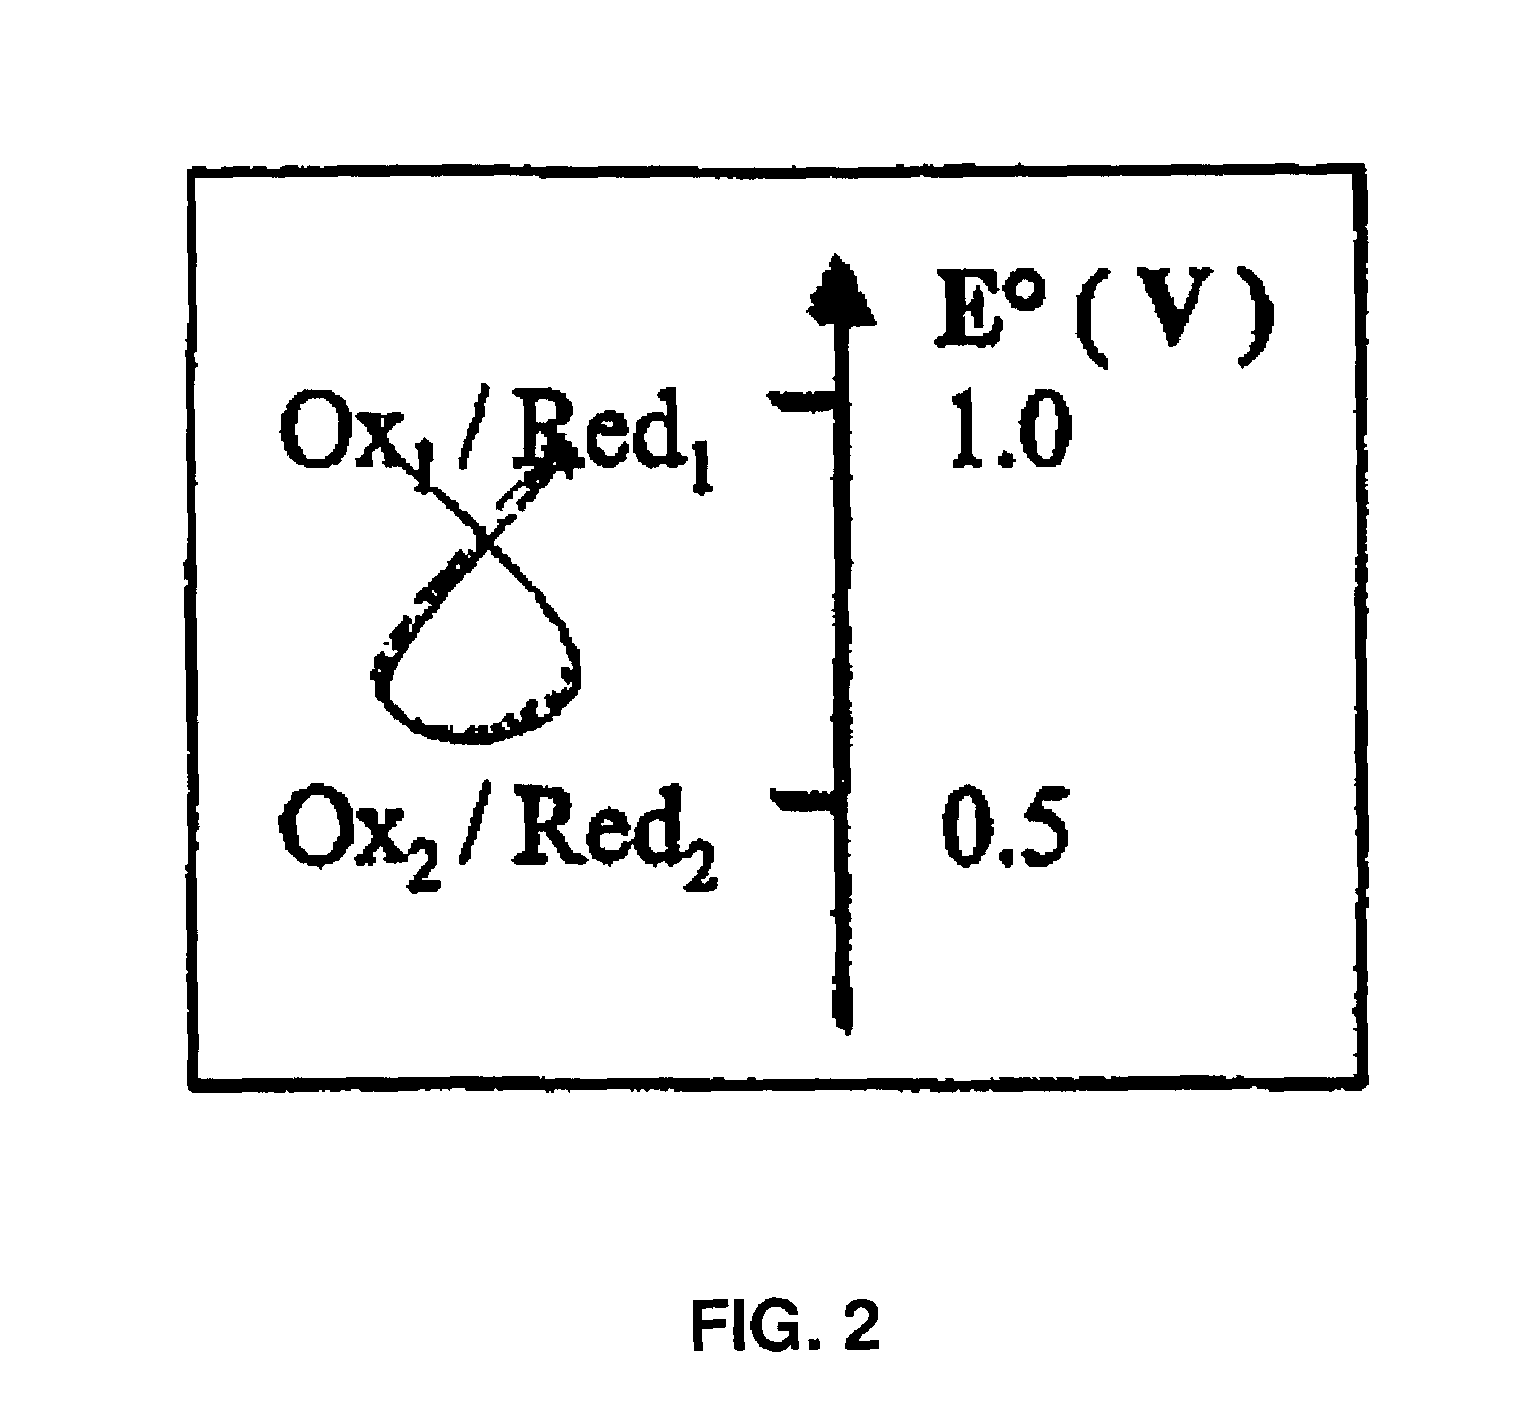 Colloidal hydroxide aqueous suspension of at least one transition element serving to reduce chrome in cement